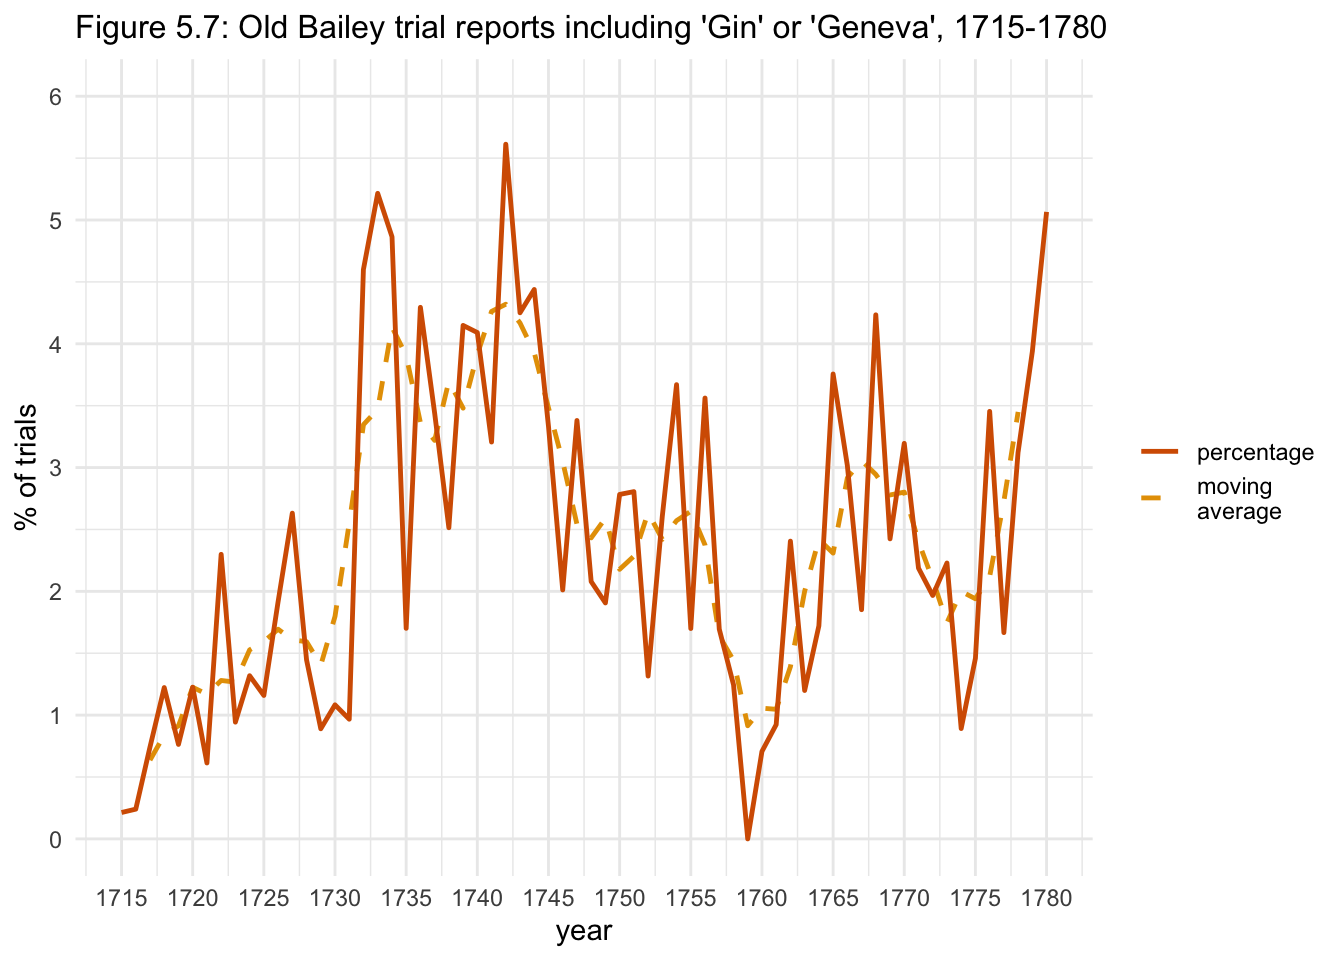 Figure 5.7: Old Bailey trial reports including 'Gin' or 'Geneva', 1715-1780